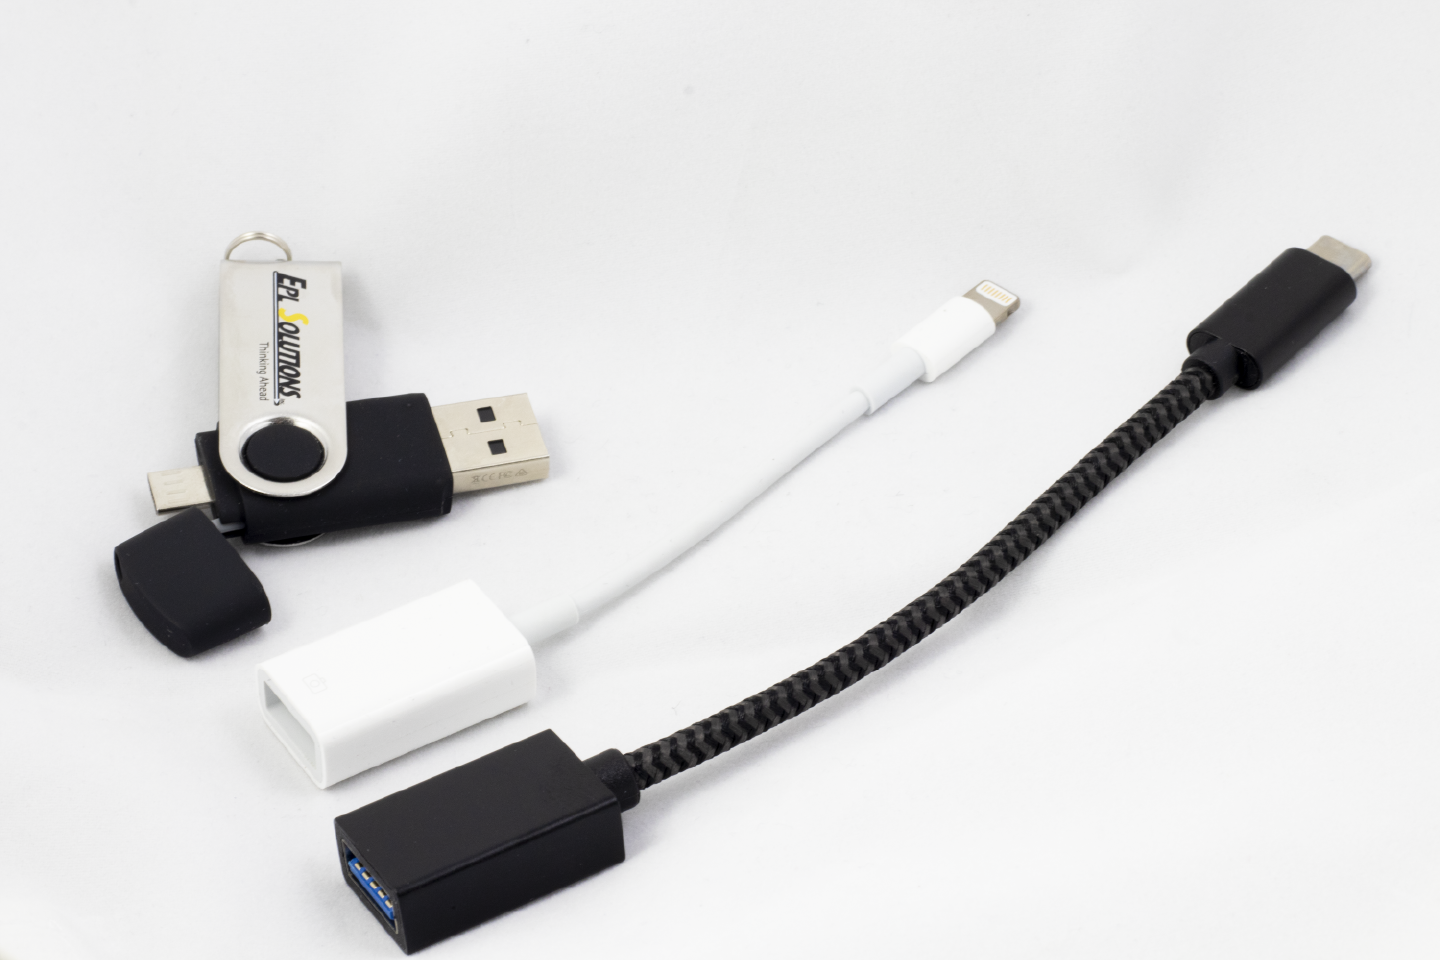 Gvision USB adapter Kit